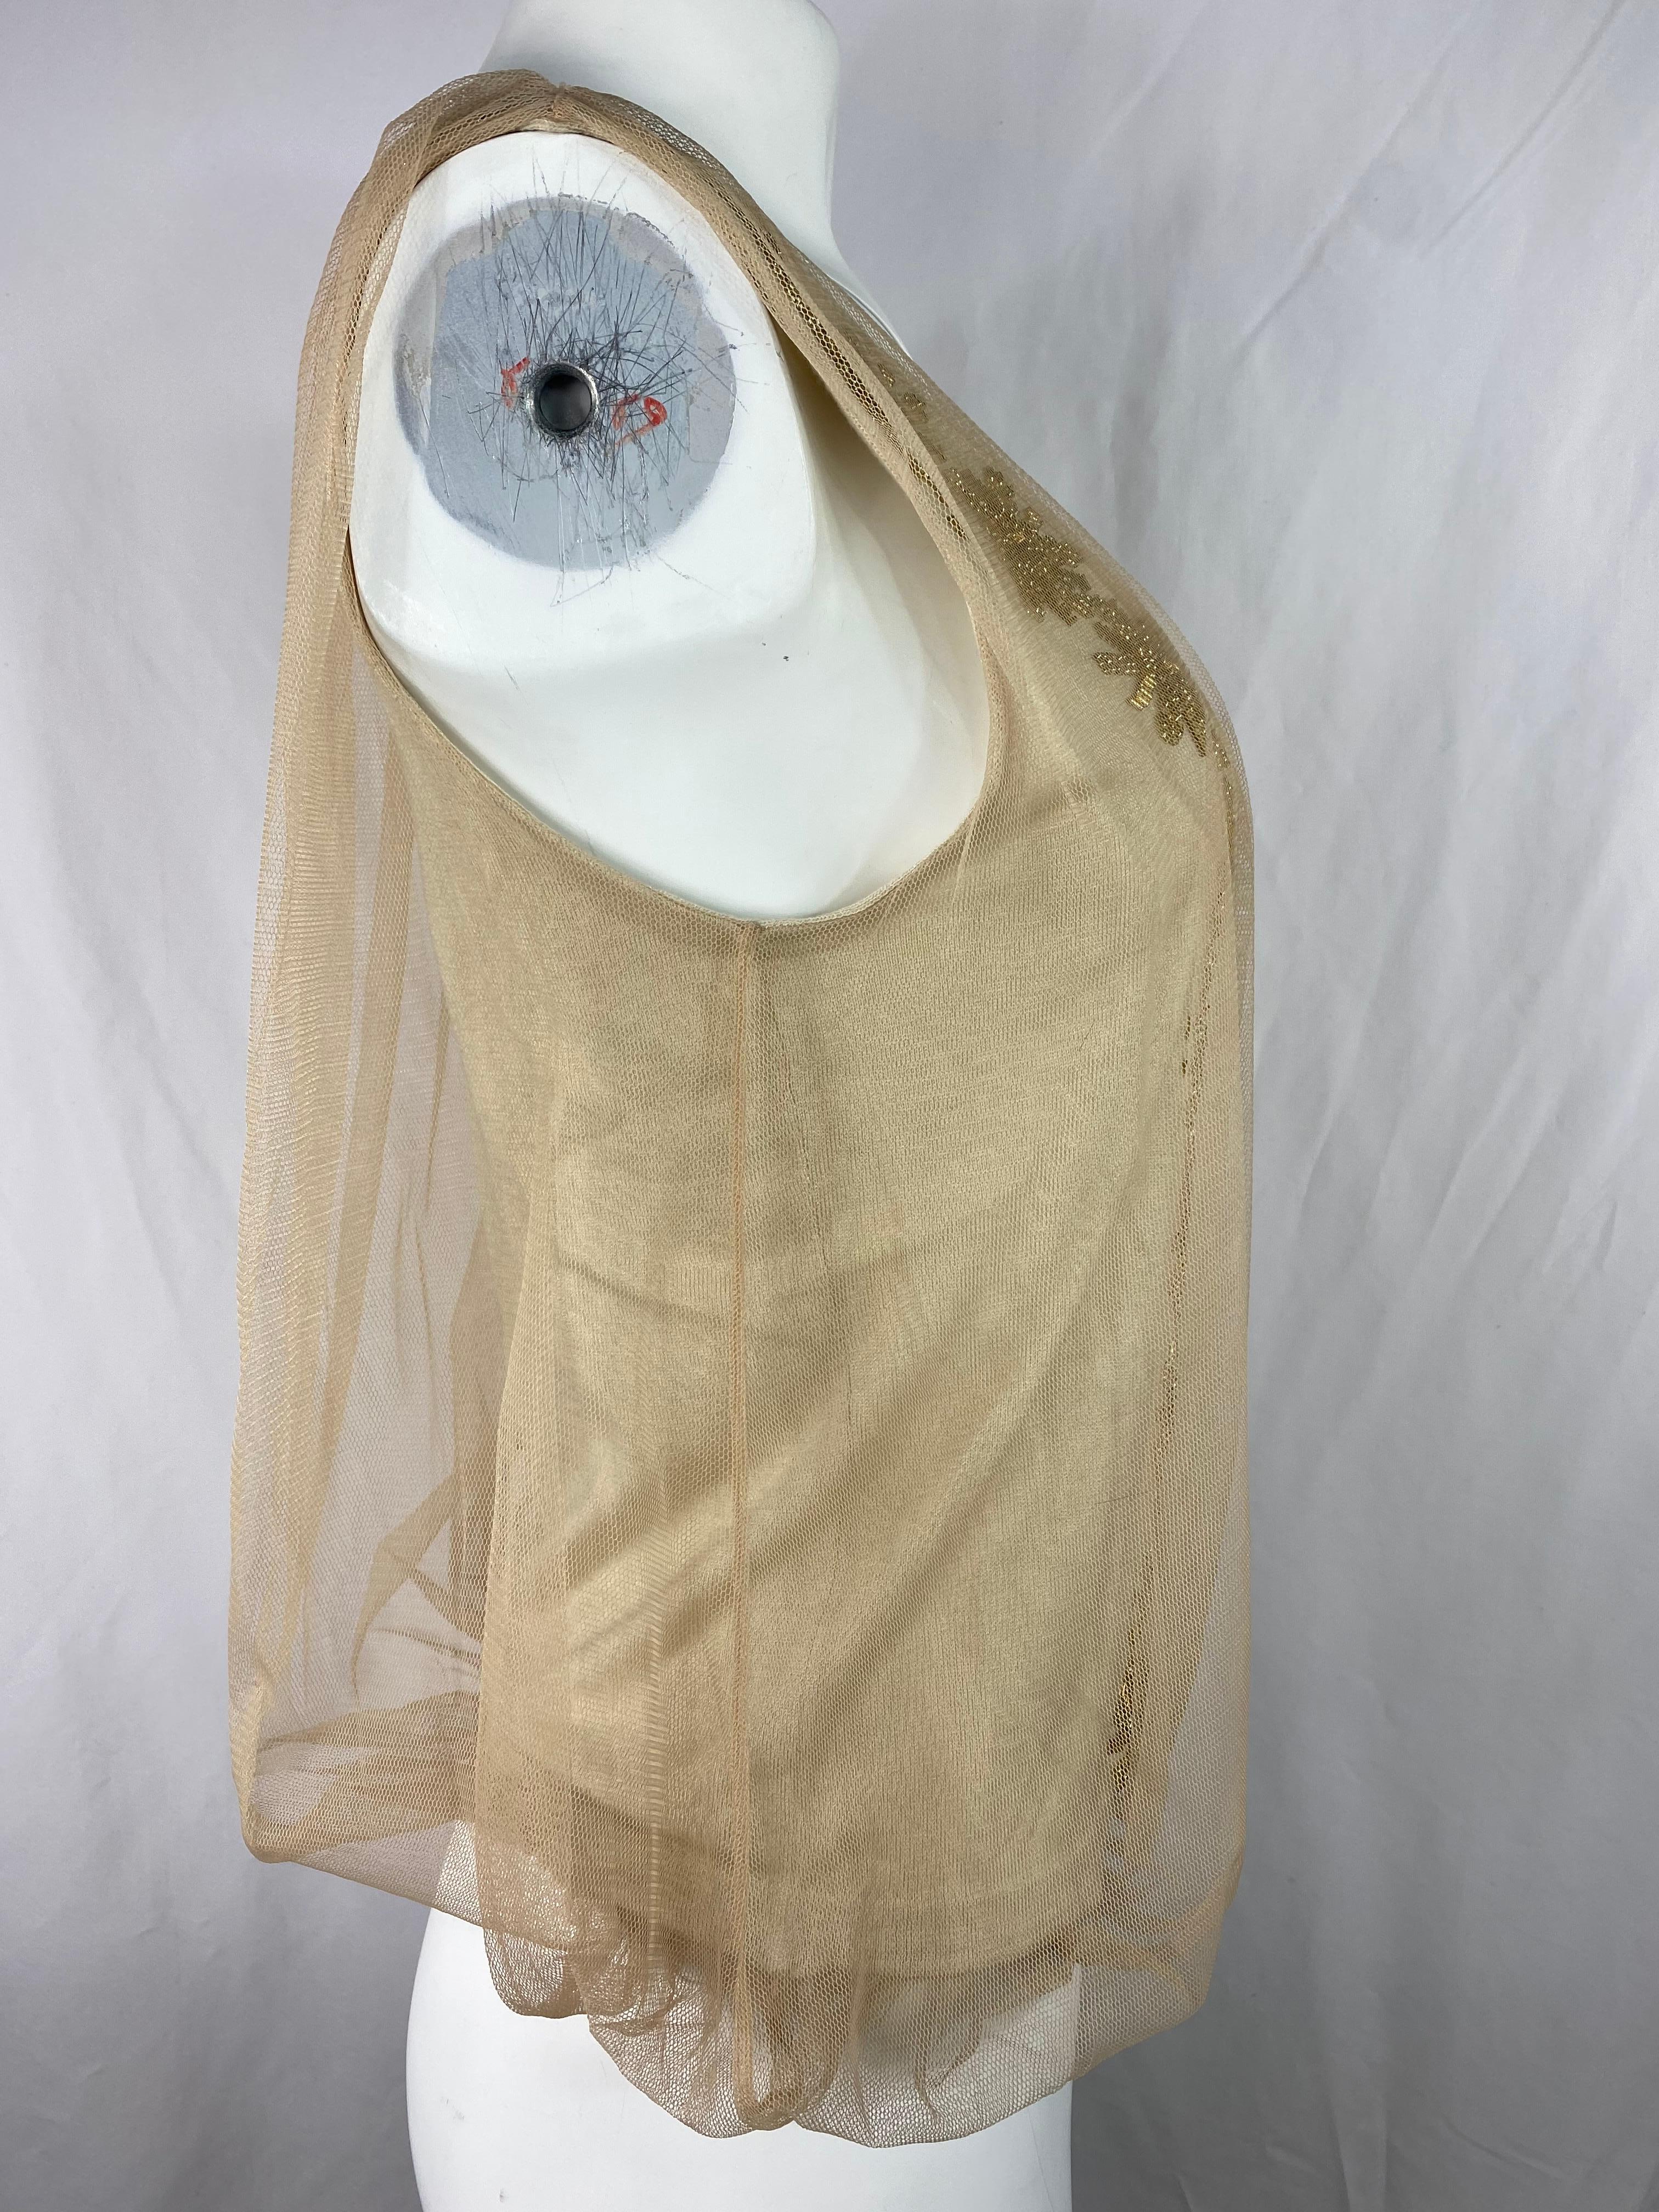 Women's 3.1 Phillip Lim Beige Knit and Tulle Vest Blouse Top, Size Small For Sale